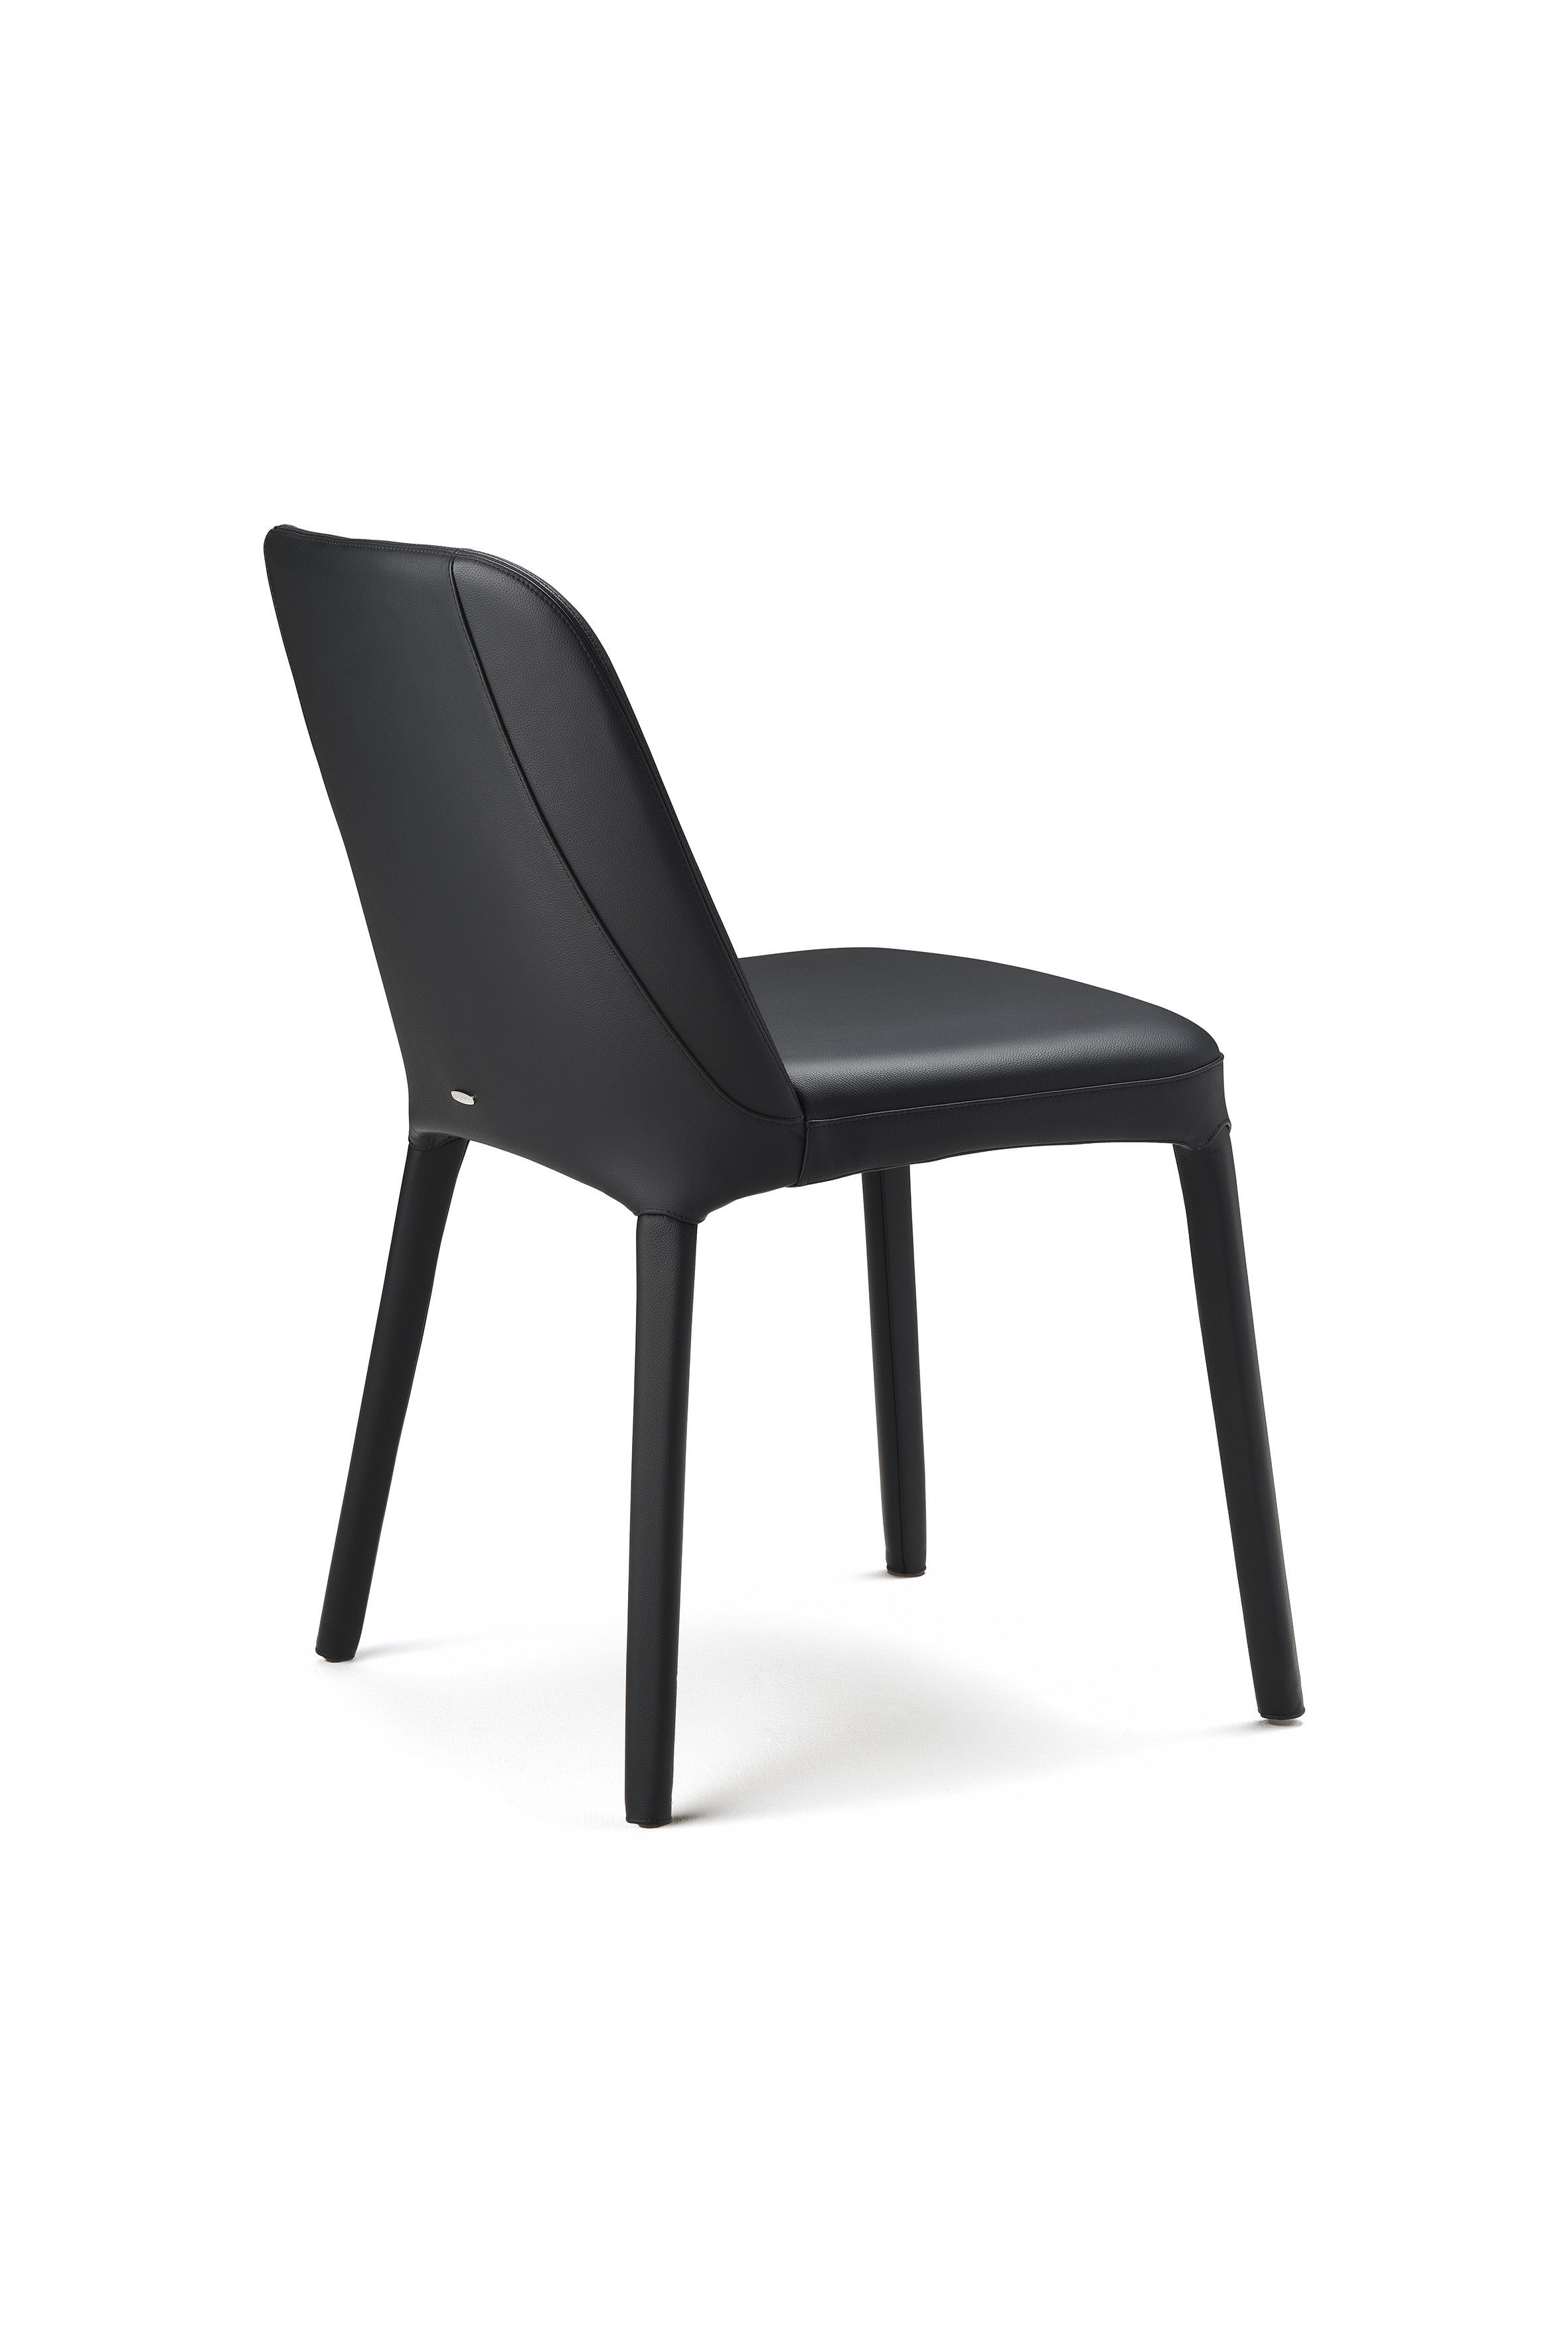 cattelan italia wilma Chair with steel frame and covered in fabric